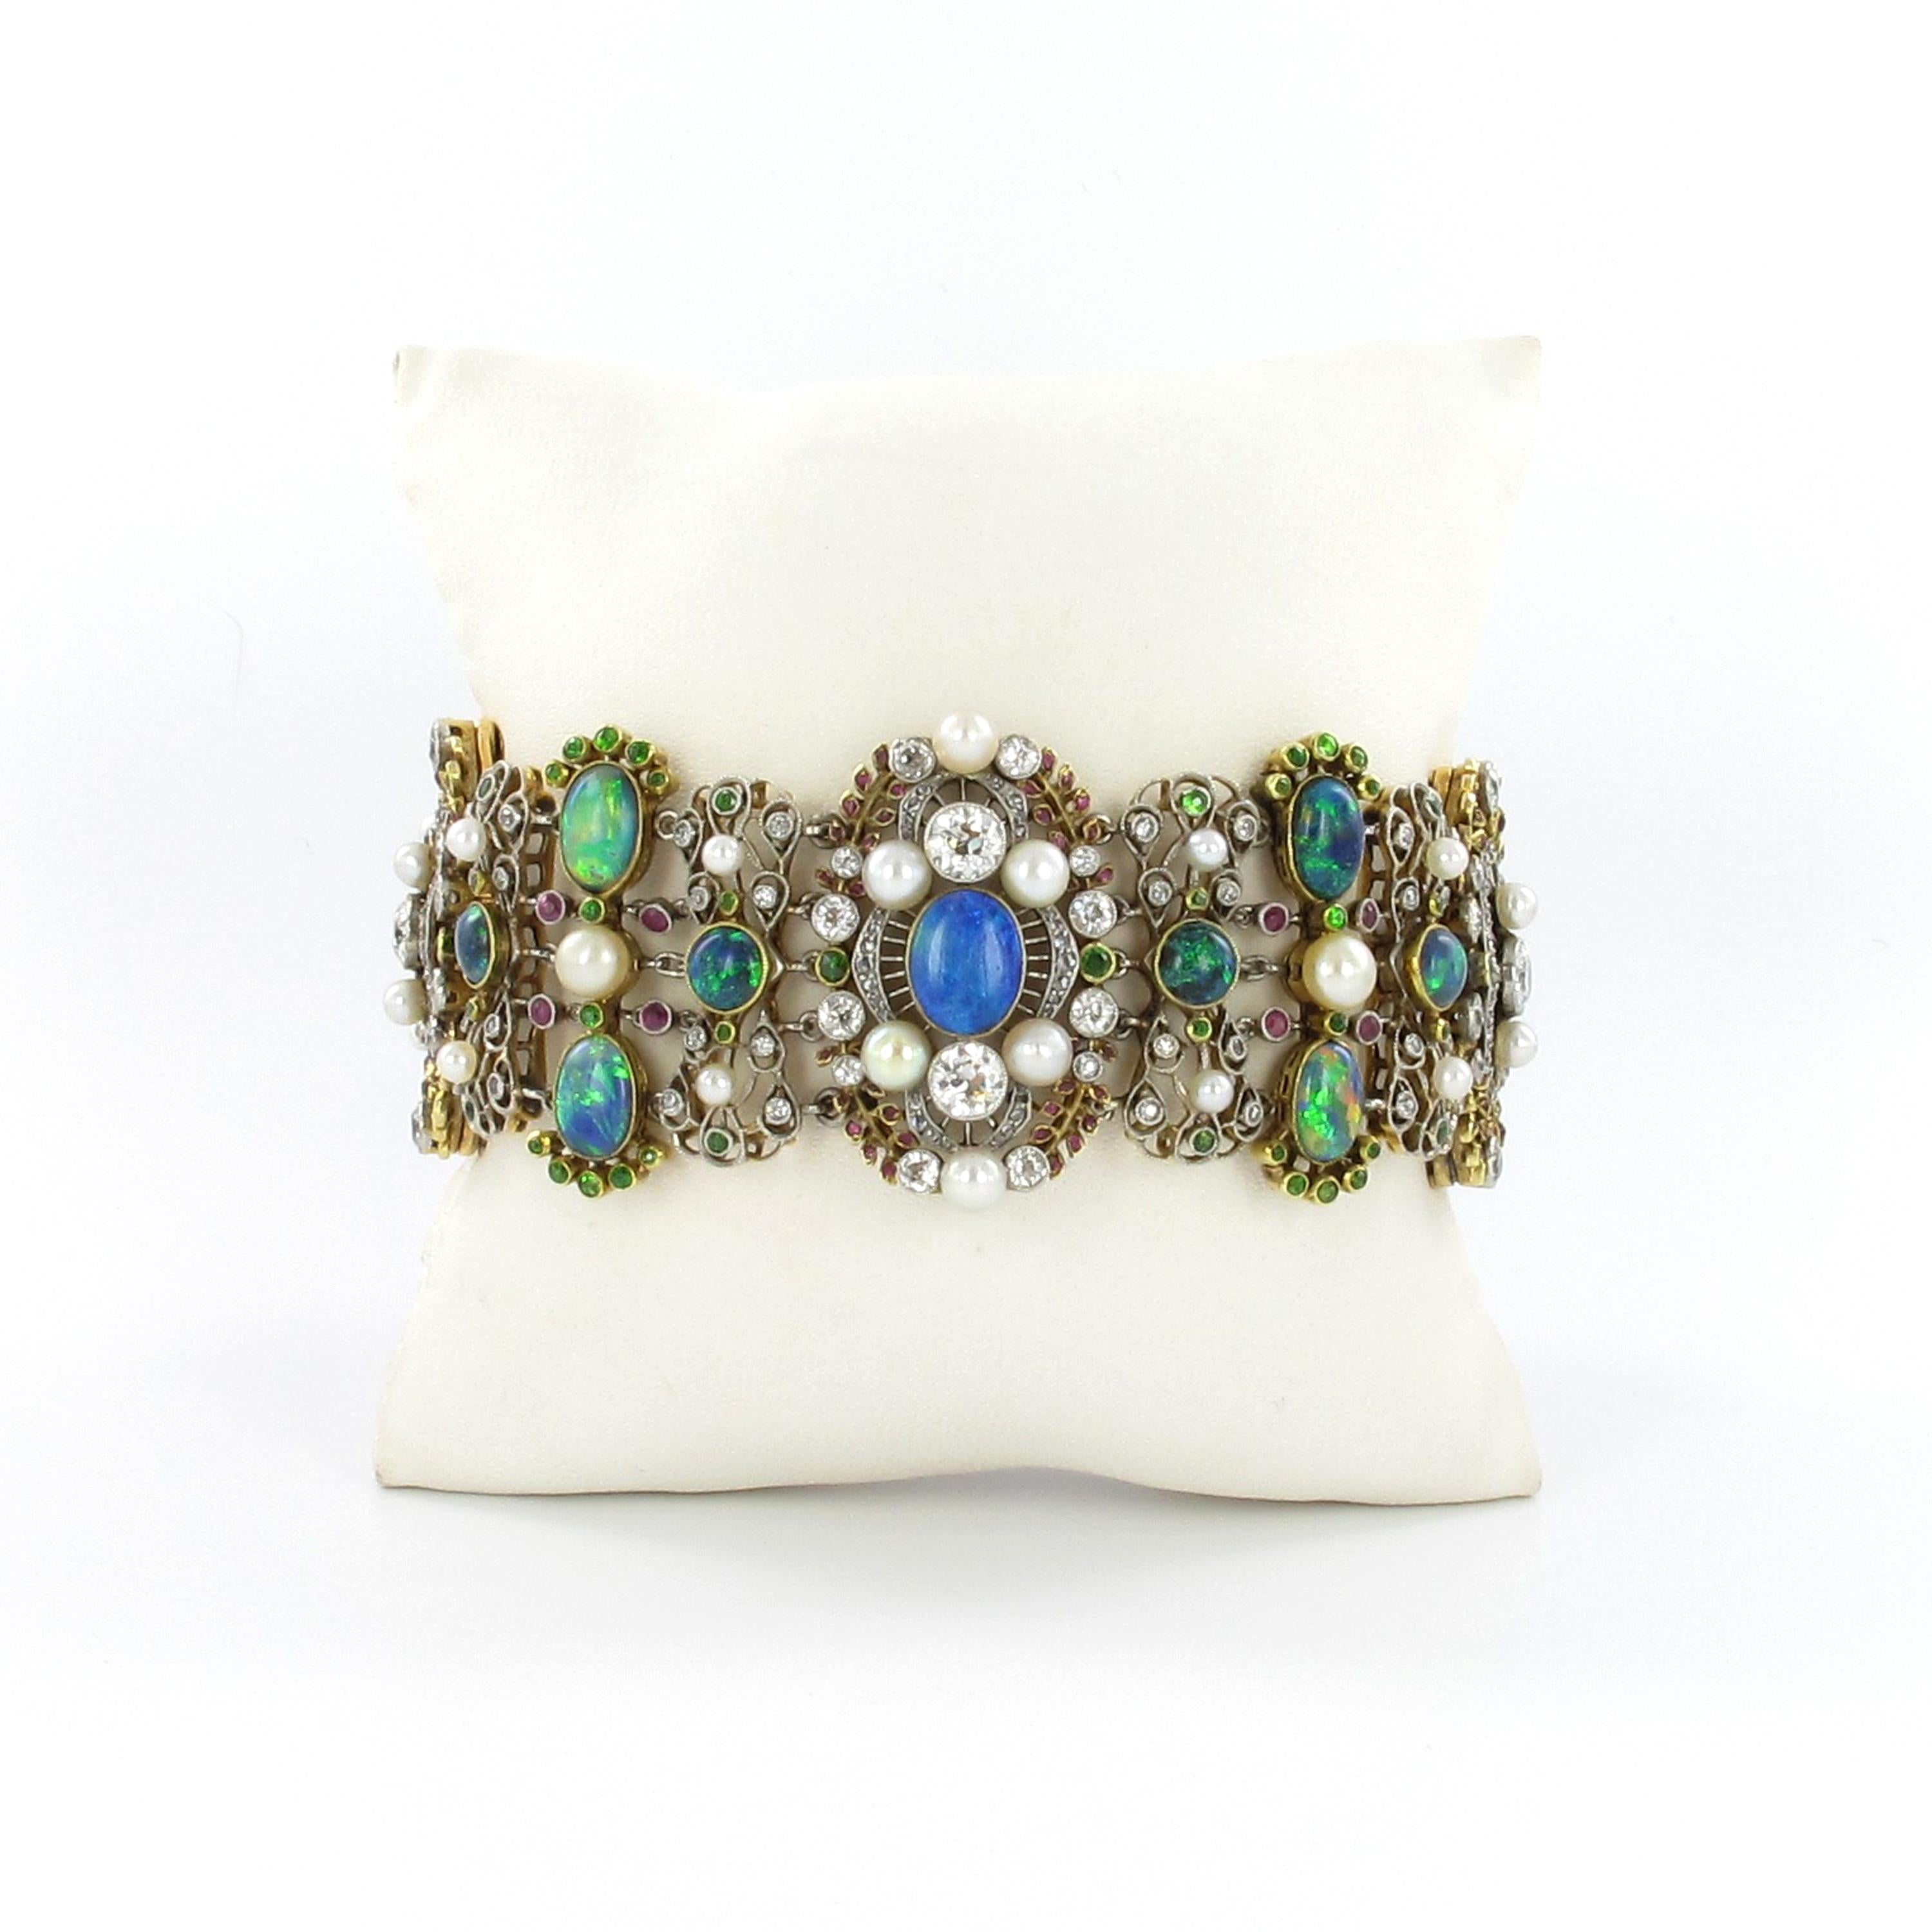 This unique and fantastic bracelet by renowned jeweller Rothmuller of Munich dates back to around 1908. 

Honoured with the exclusive title of court jeweller (Hofjuwelier) in 1908, Karl Rothmuller was one of the most sought-after jewellery artists